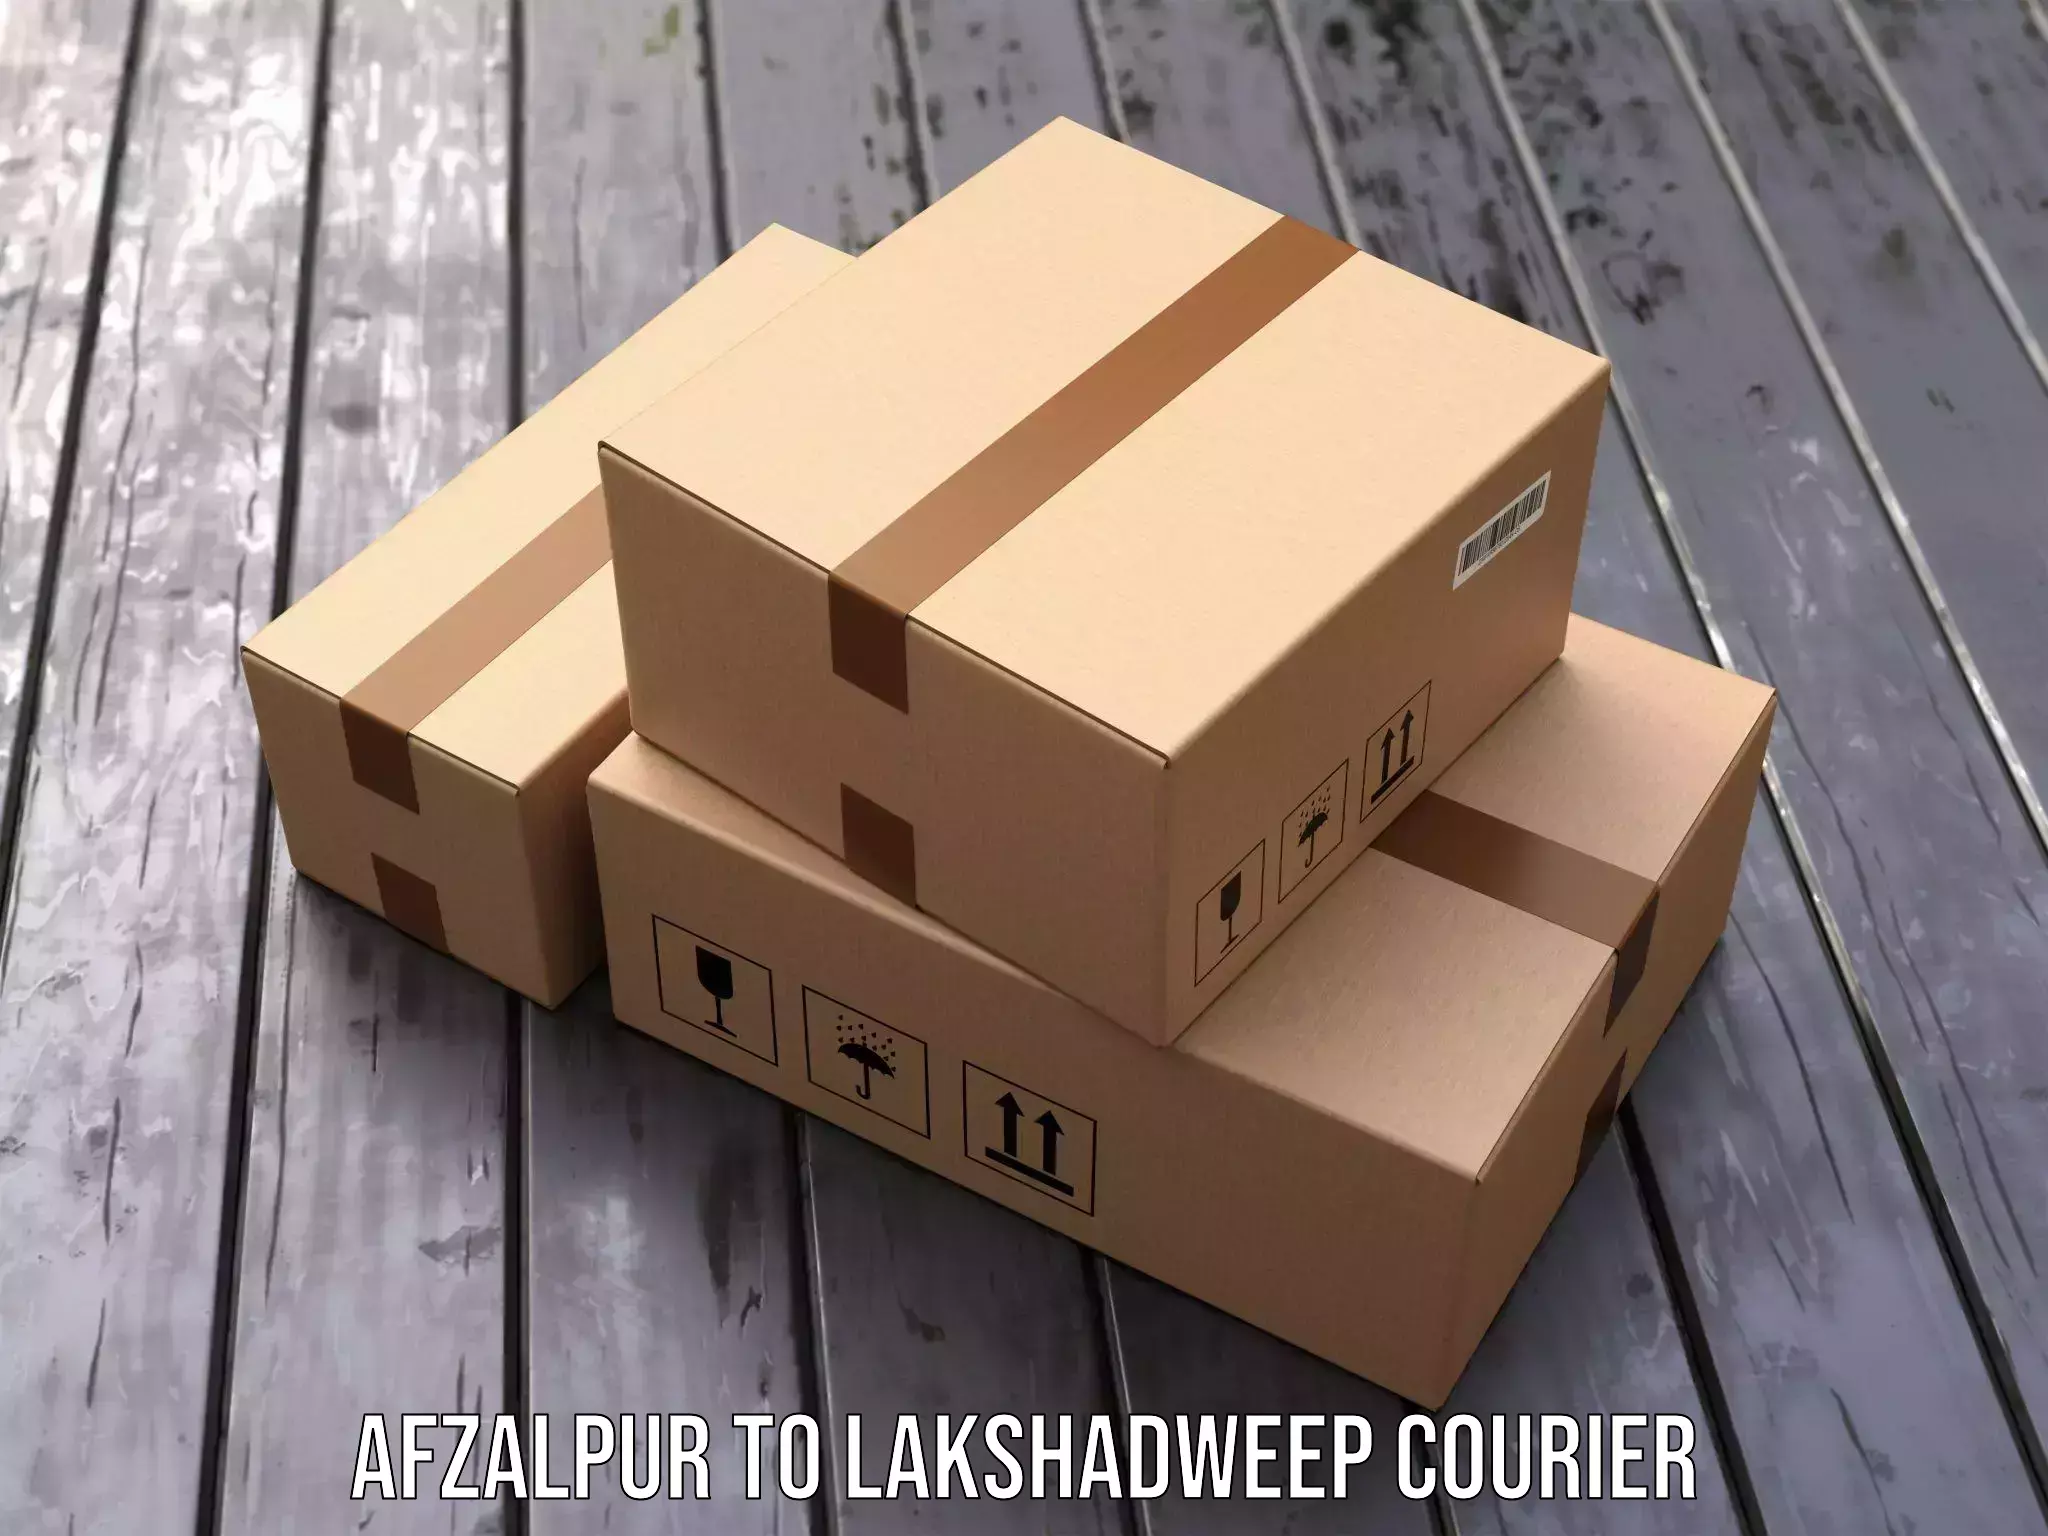 Cash on delivery service Afzalpur to Lakshadweep